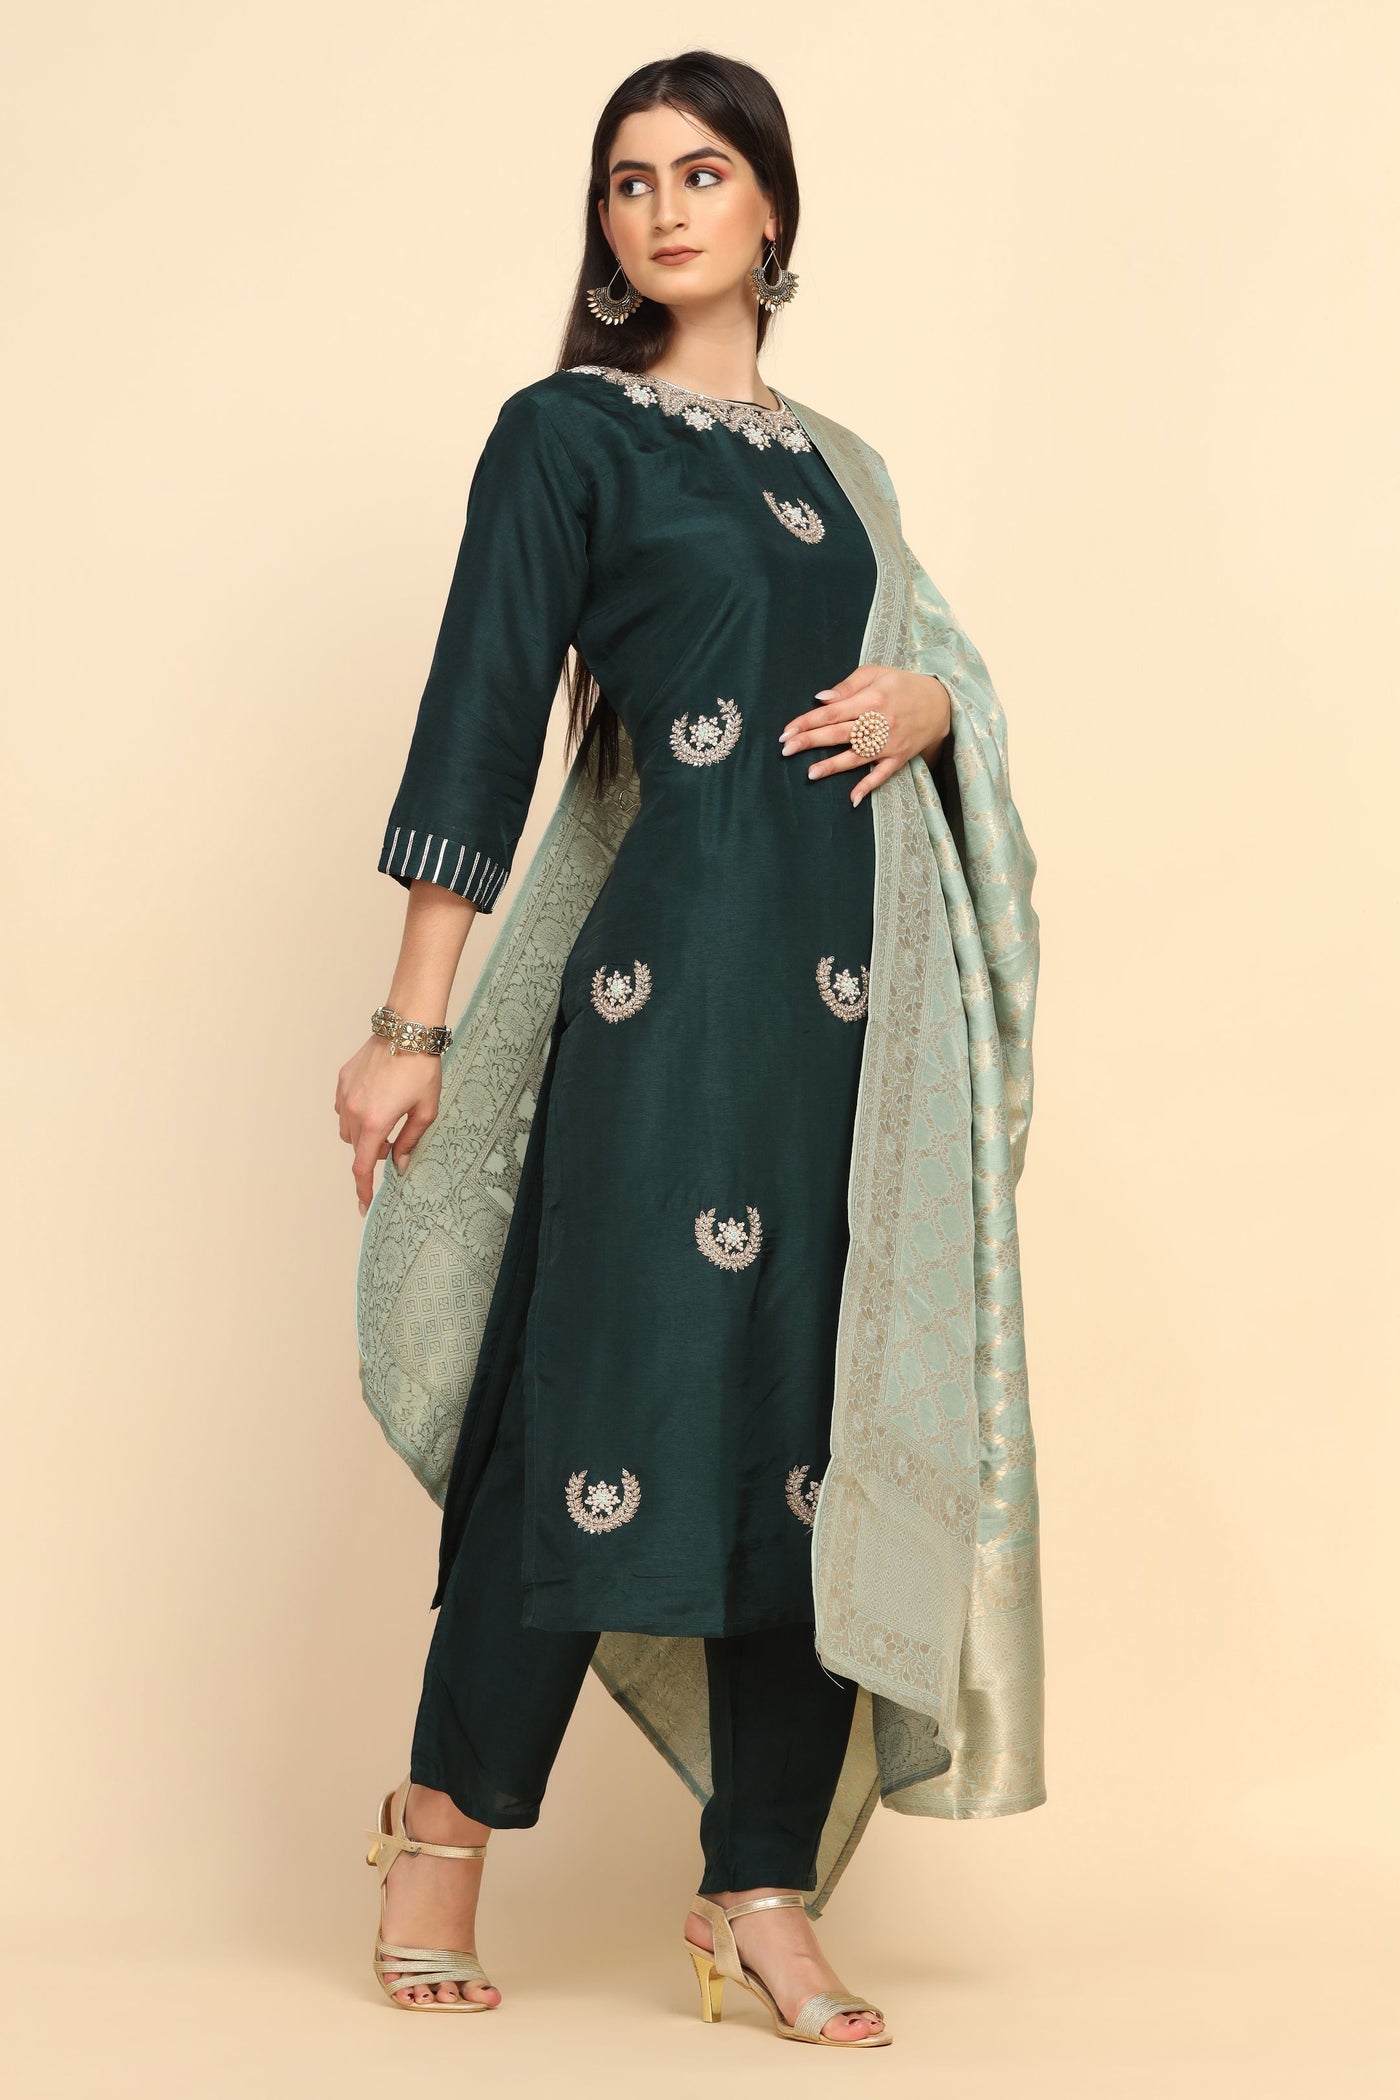 Girl Wearing a Bottle Green Floral Motif Embroidered Suit